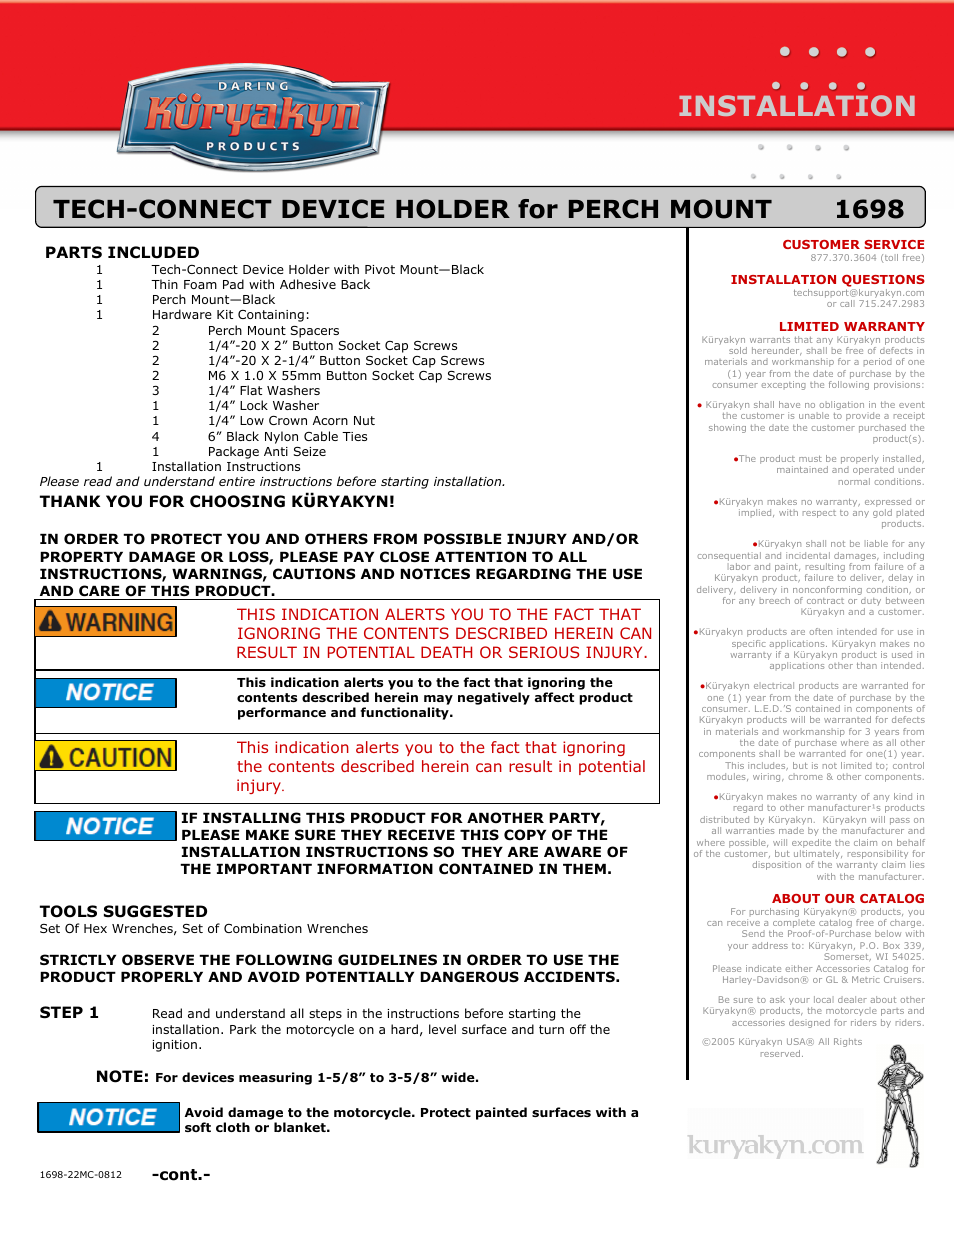 1698 TECH-CONNECT DEVICE HOLDER for PERCH MOUNT